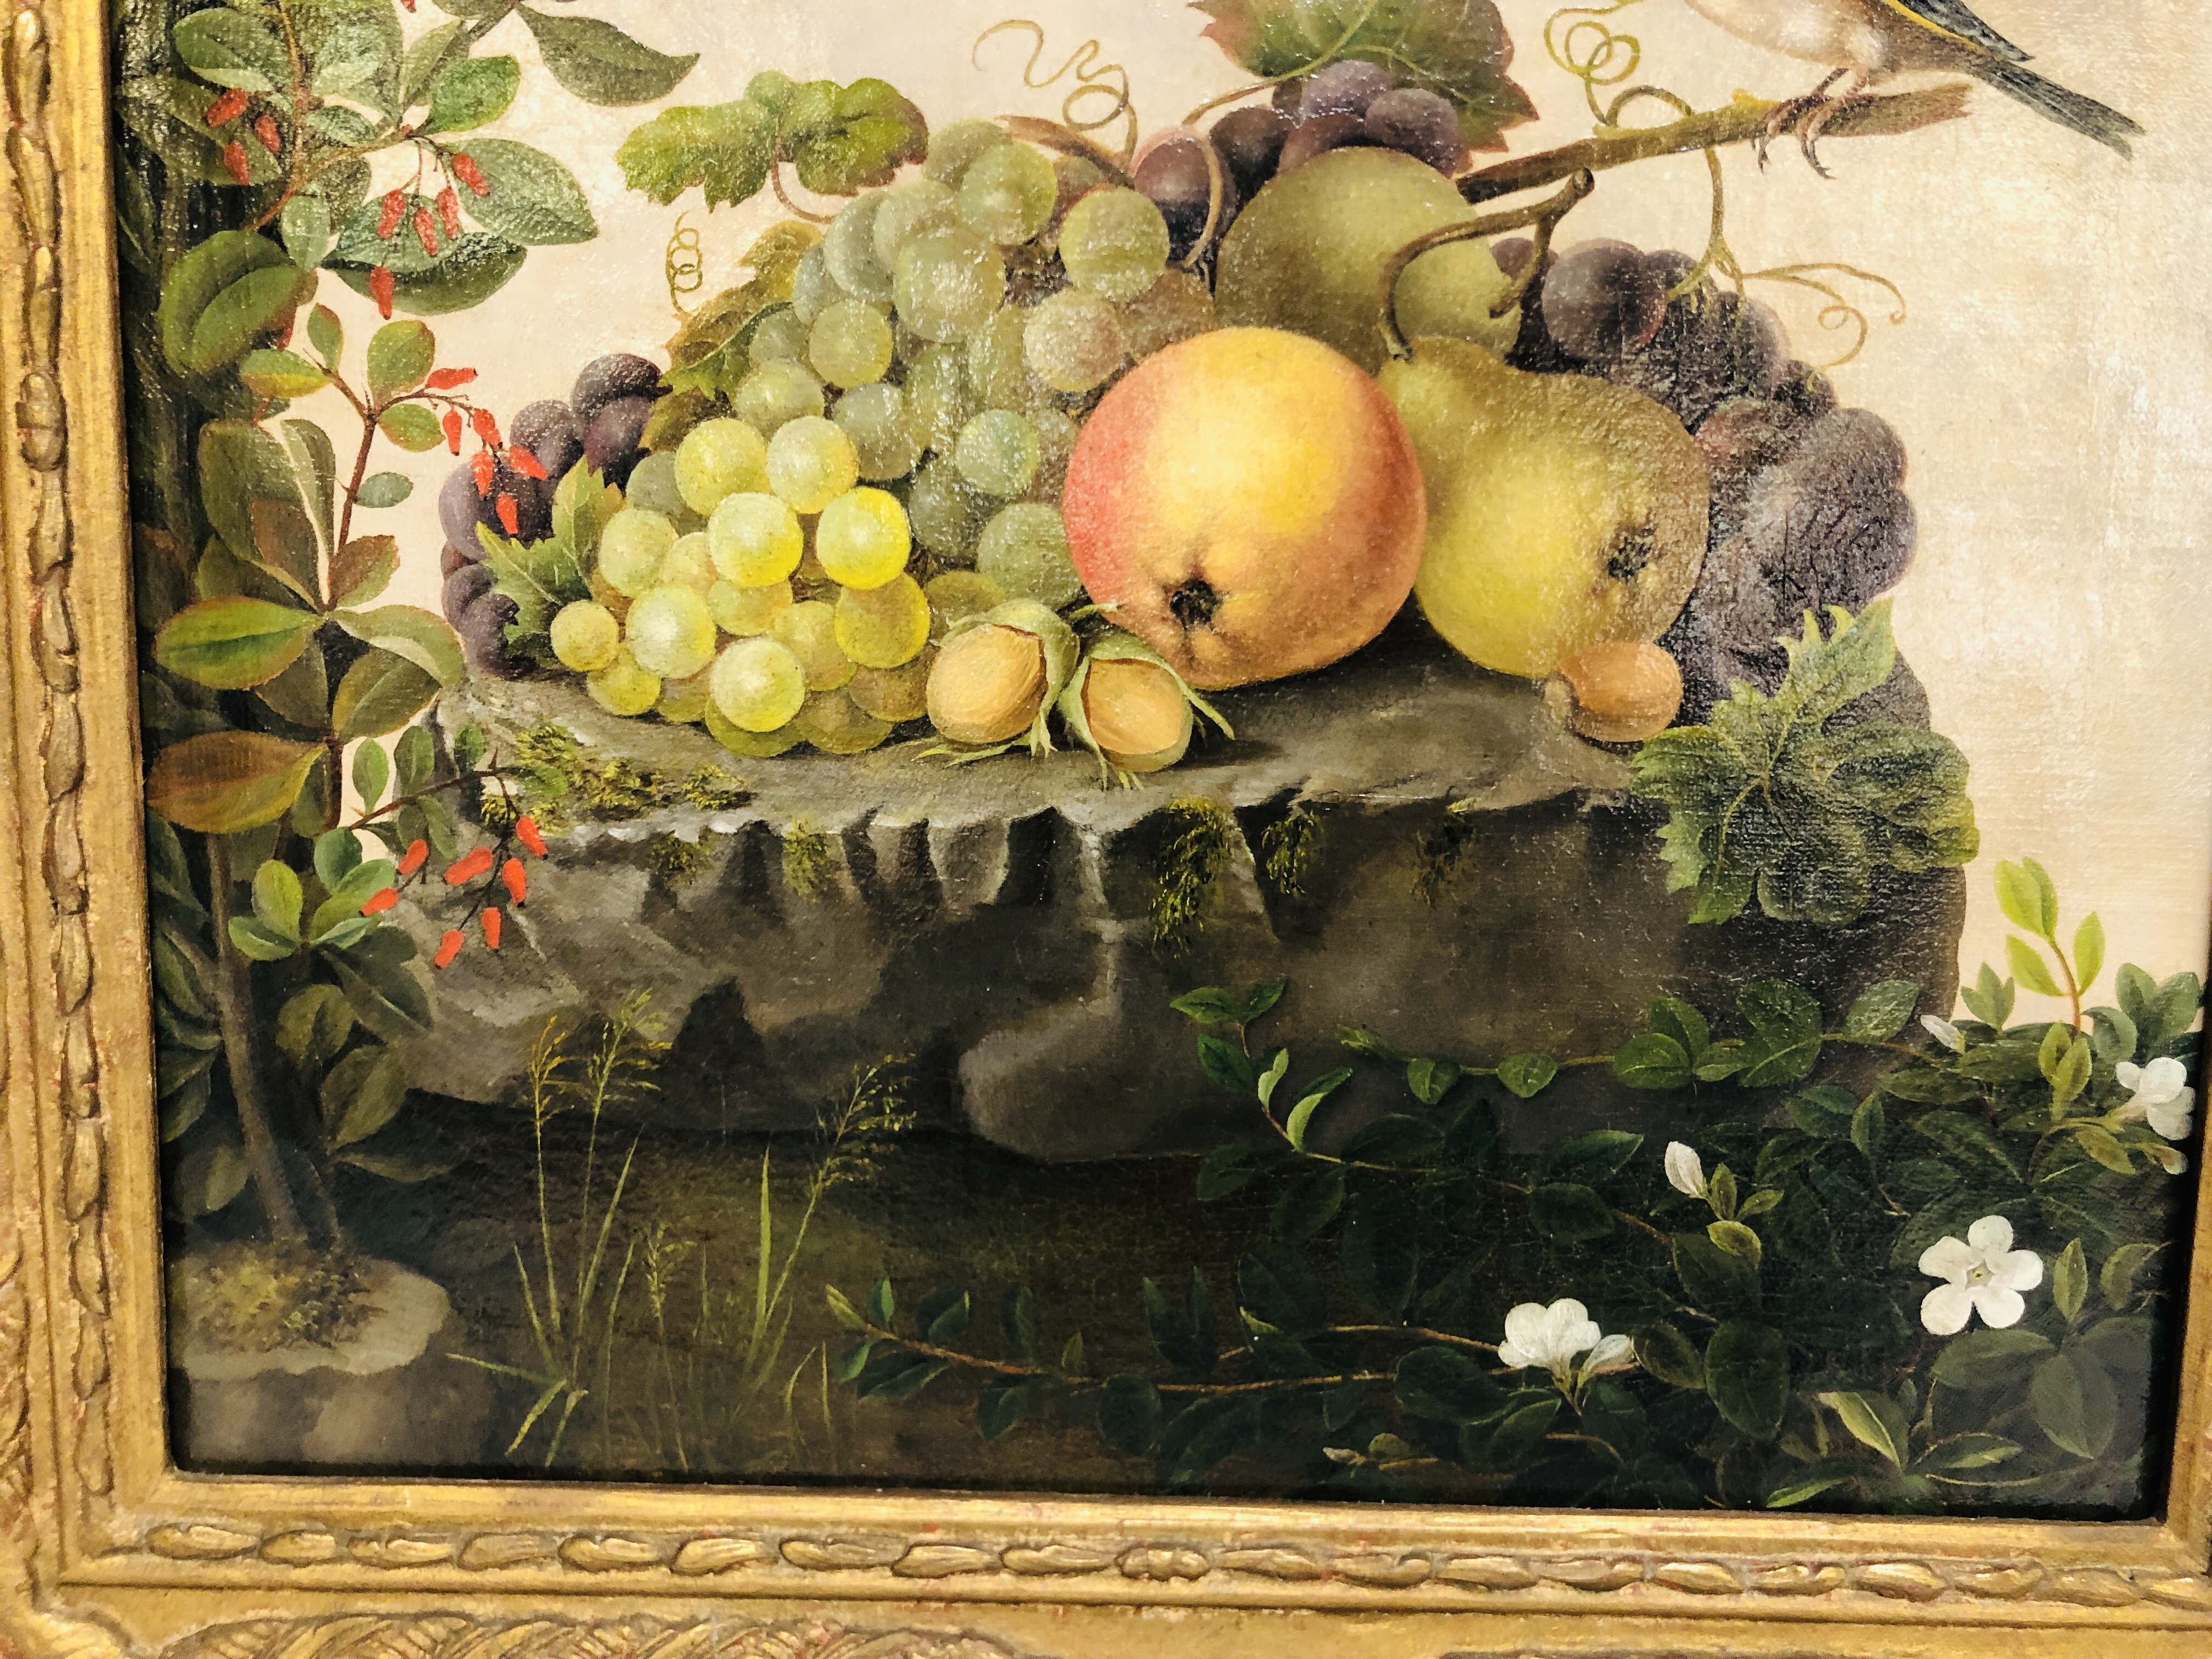 ENGLISH SCHOOL CIRCA 1900 "STILL LIFE WITH FRUIT AND FINCH", OIL ON CANVAS 36 X 35CM. - Image 3 of 6